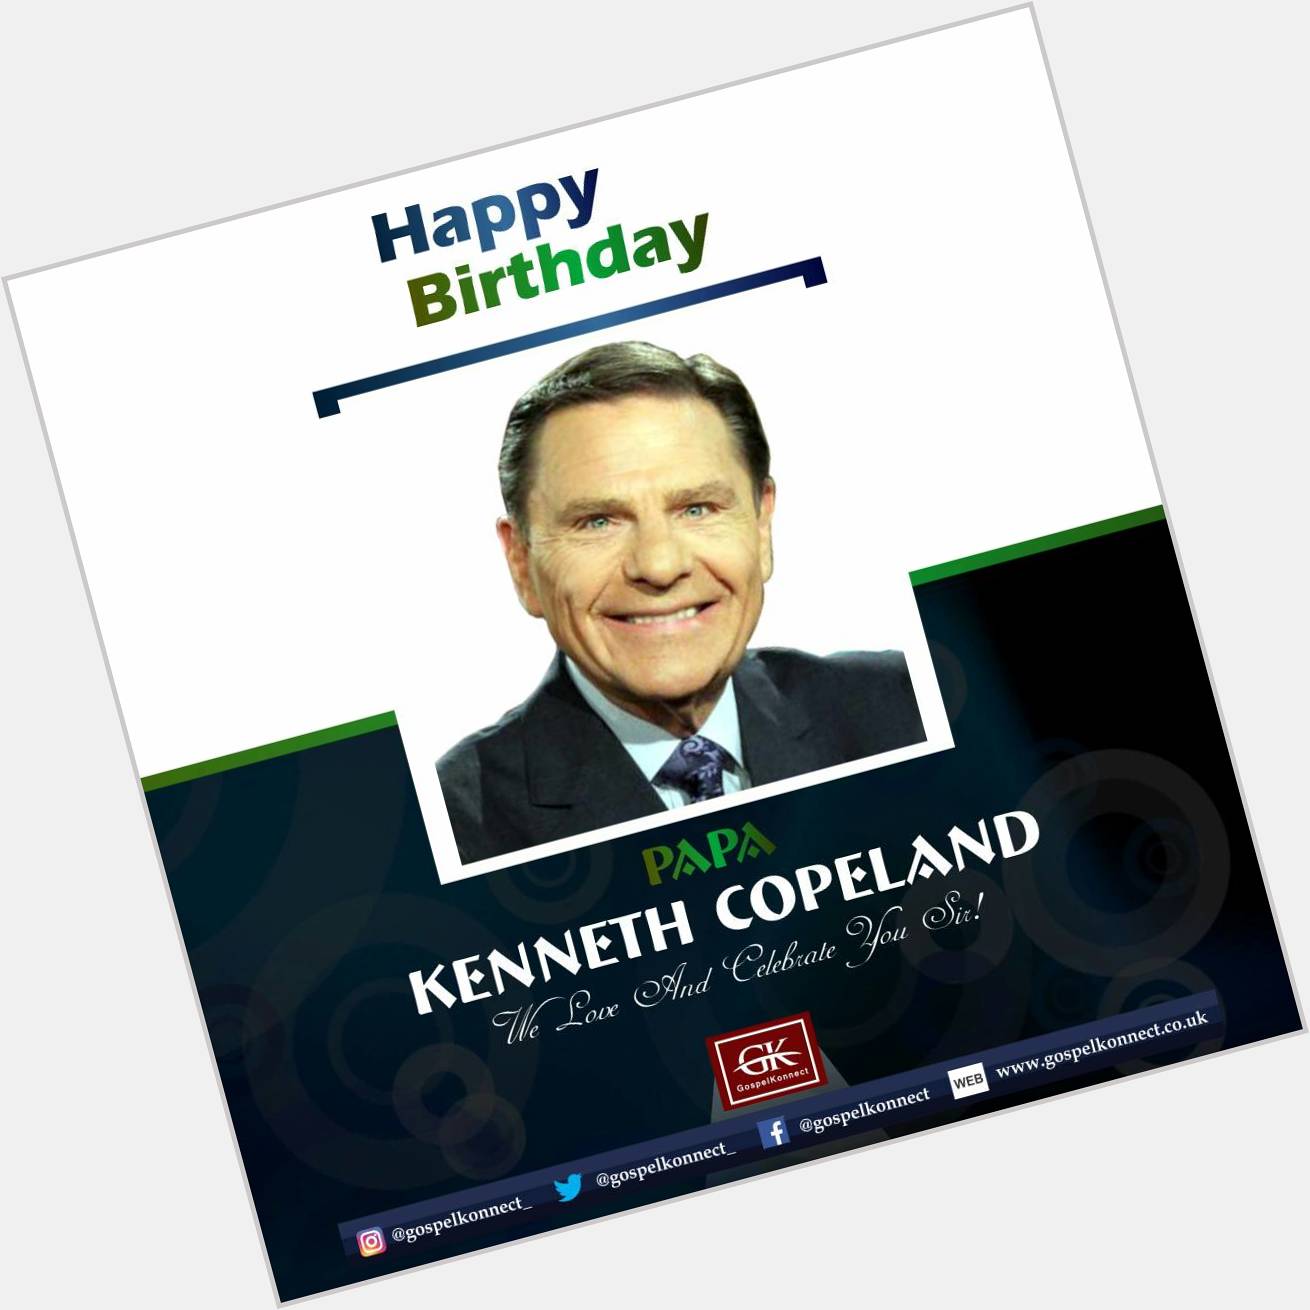 Happy birthday Papa Kenneth Copeland! 
We love and celebrate you sir!  